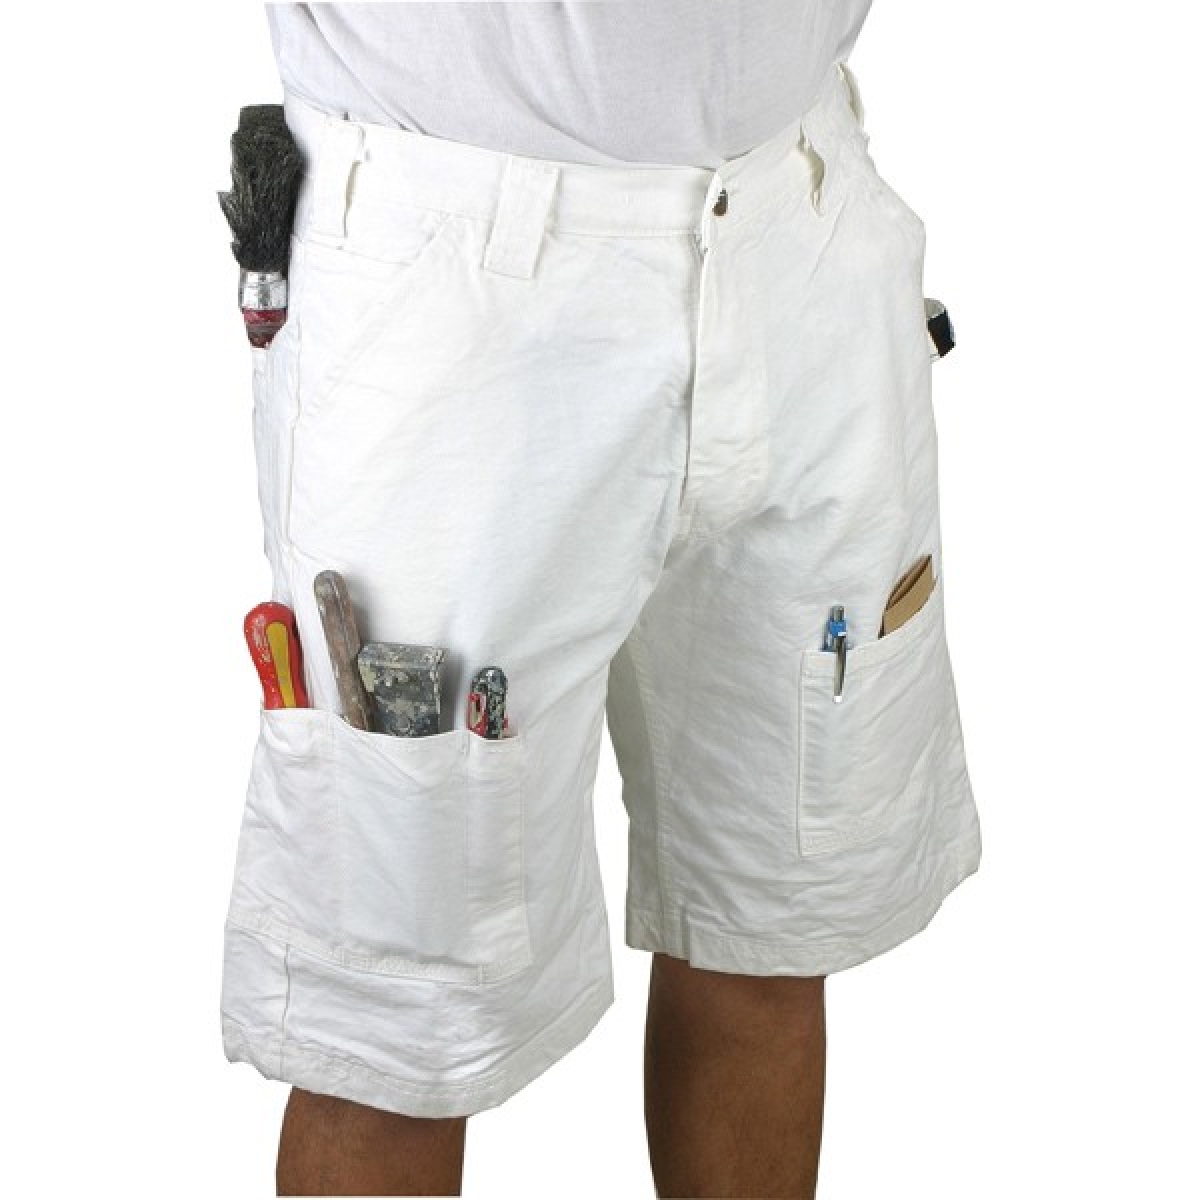 Armed White Painters Shorts